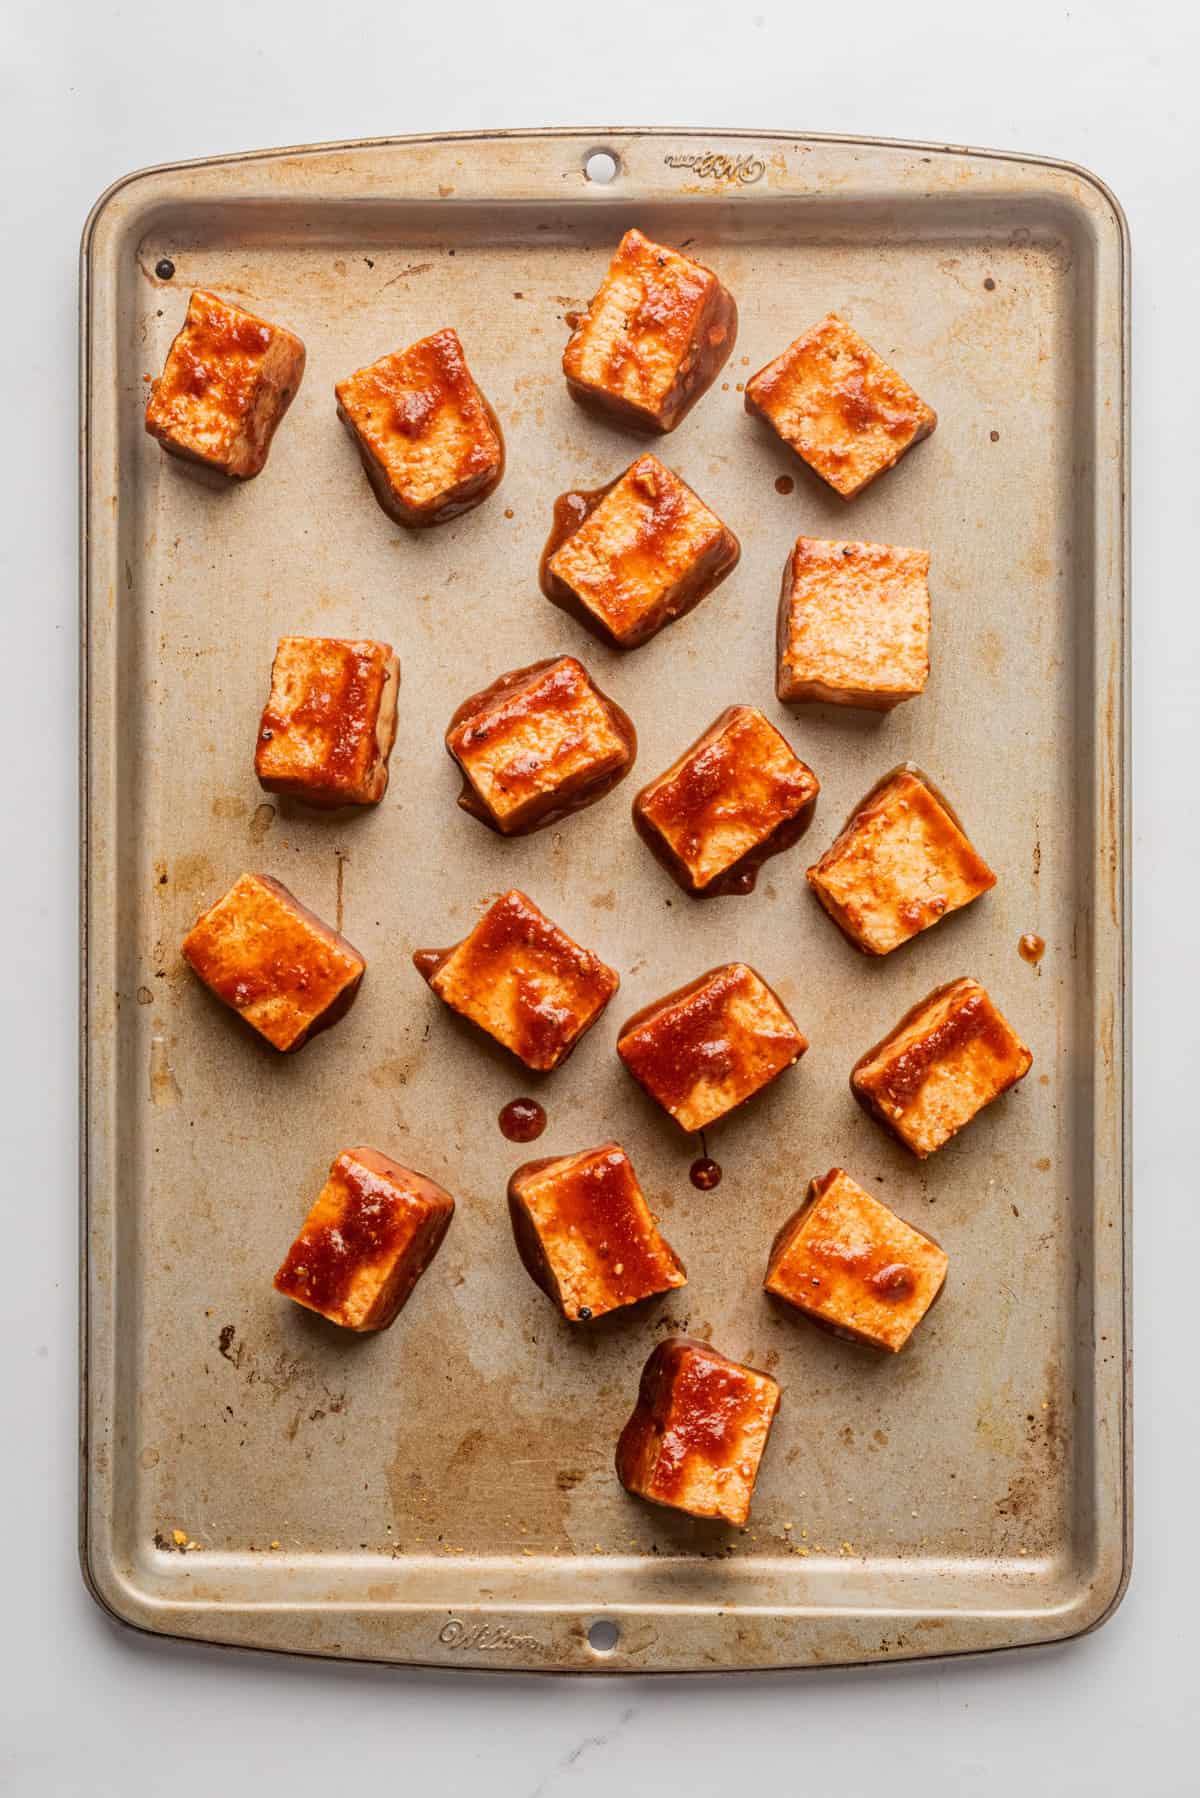 An image of gochujang sauce-coated tofu evenly spread out in a baking pan.